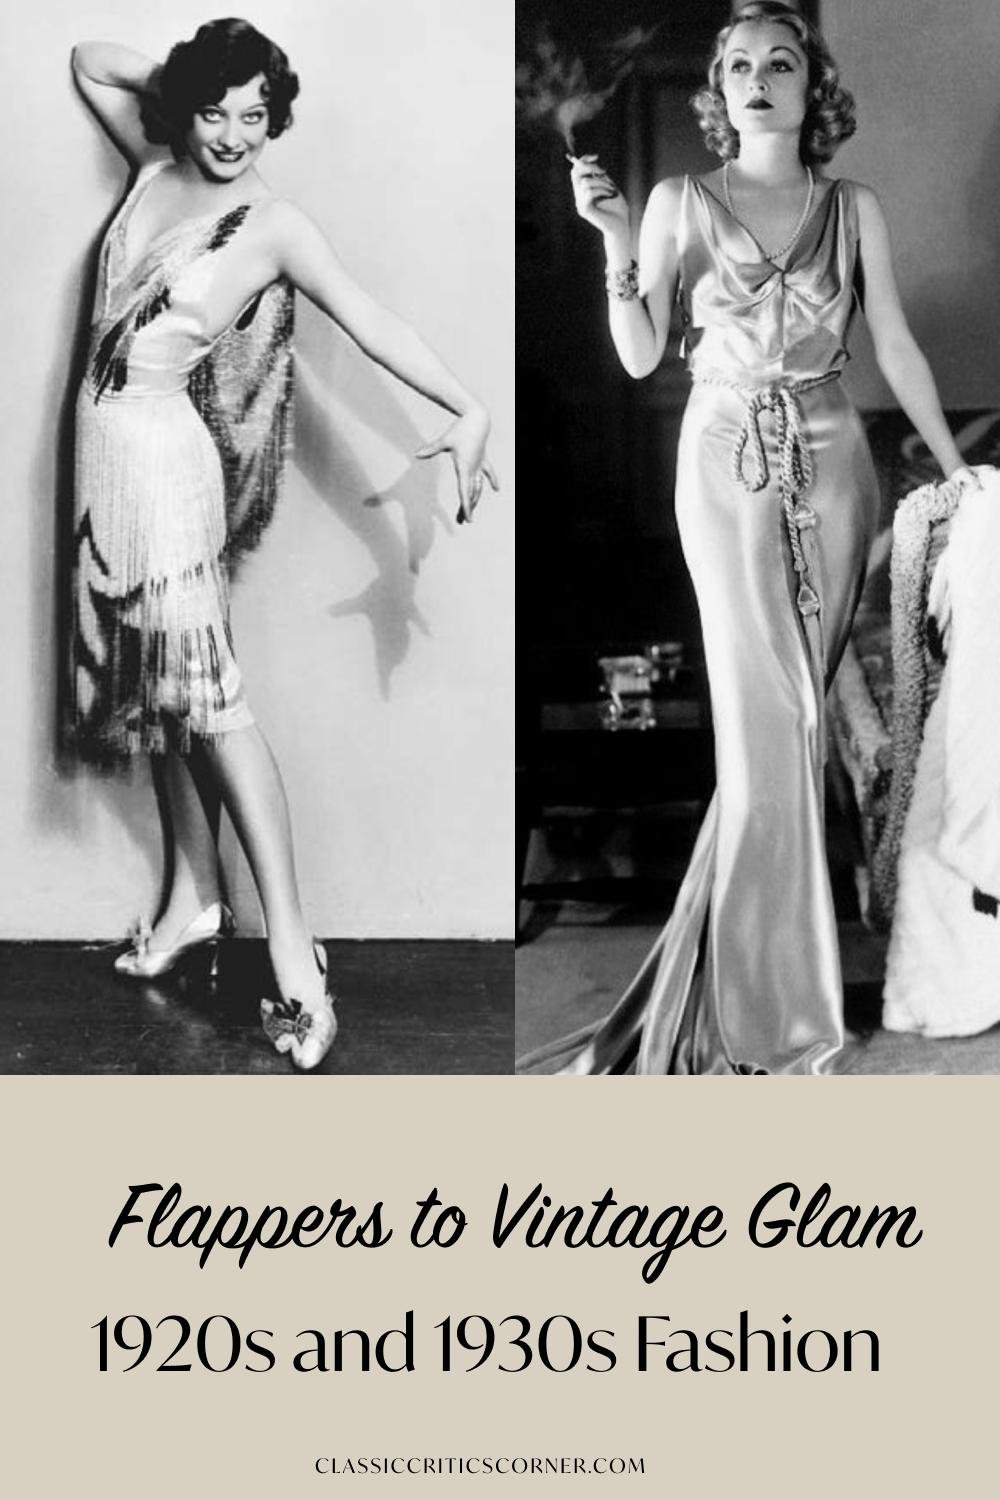 Paris fashion of 1923. Flapper fashion of the 1920s. Evening gown by  designer Drecoll, light brown fur, silver lace & brown grosgrain ribbon  trim on a frock of mauve velvet with a